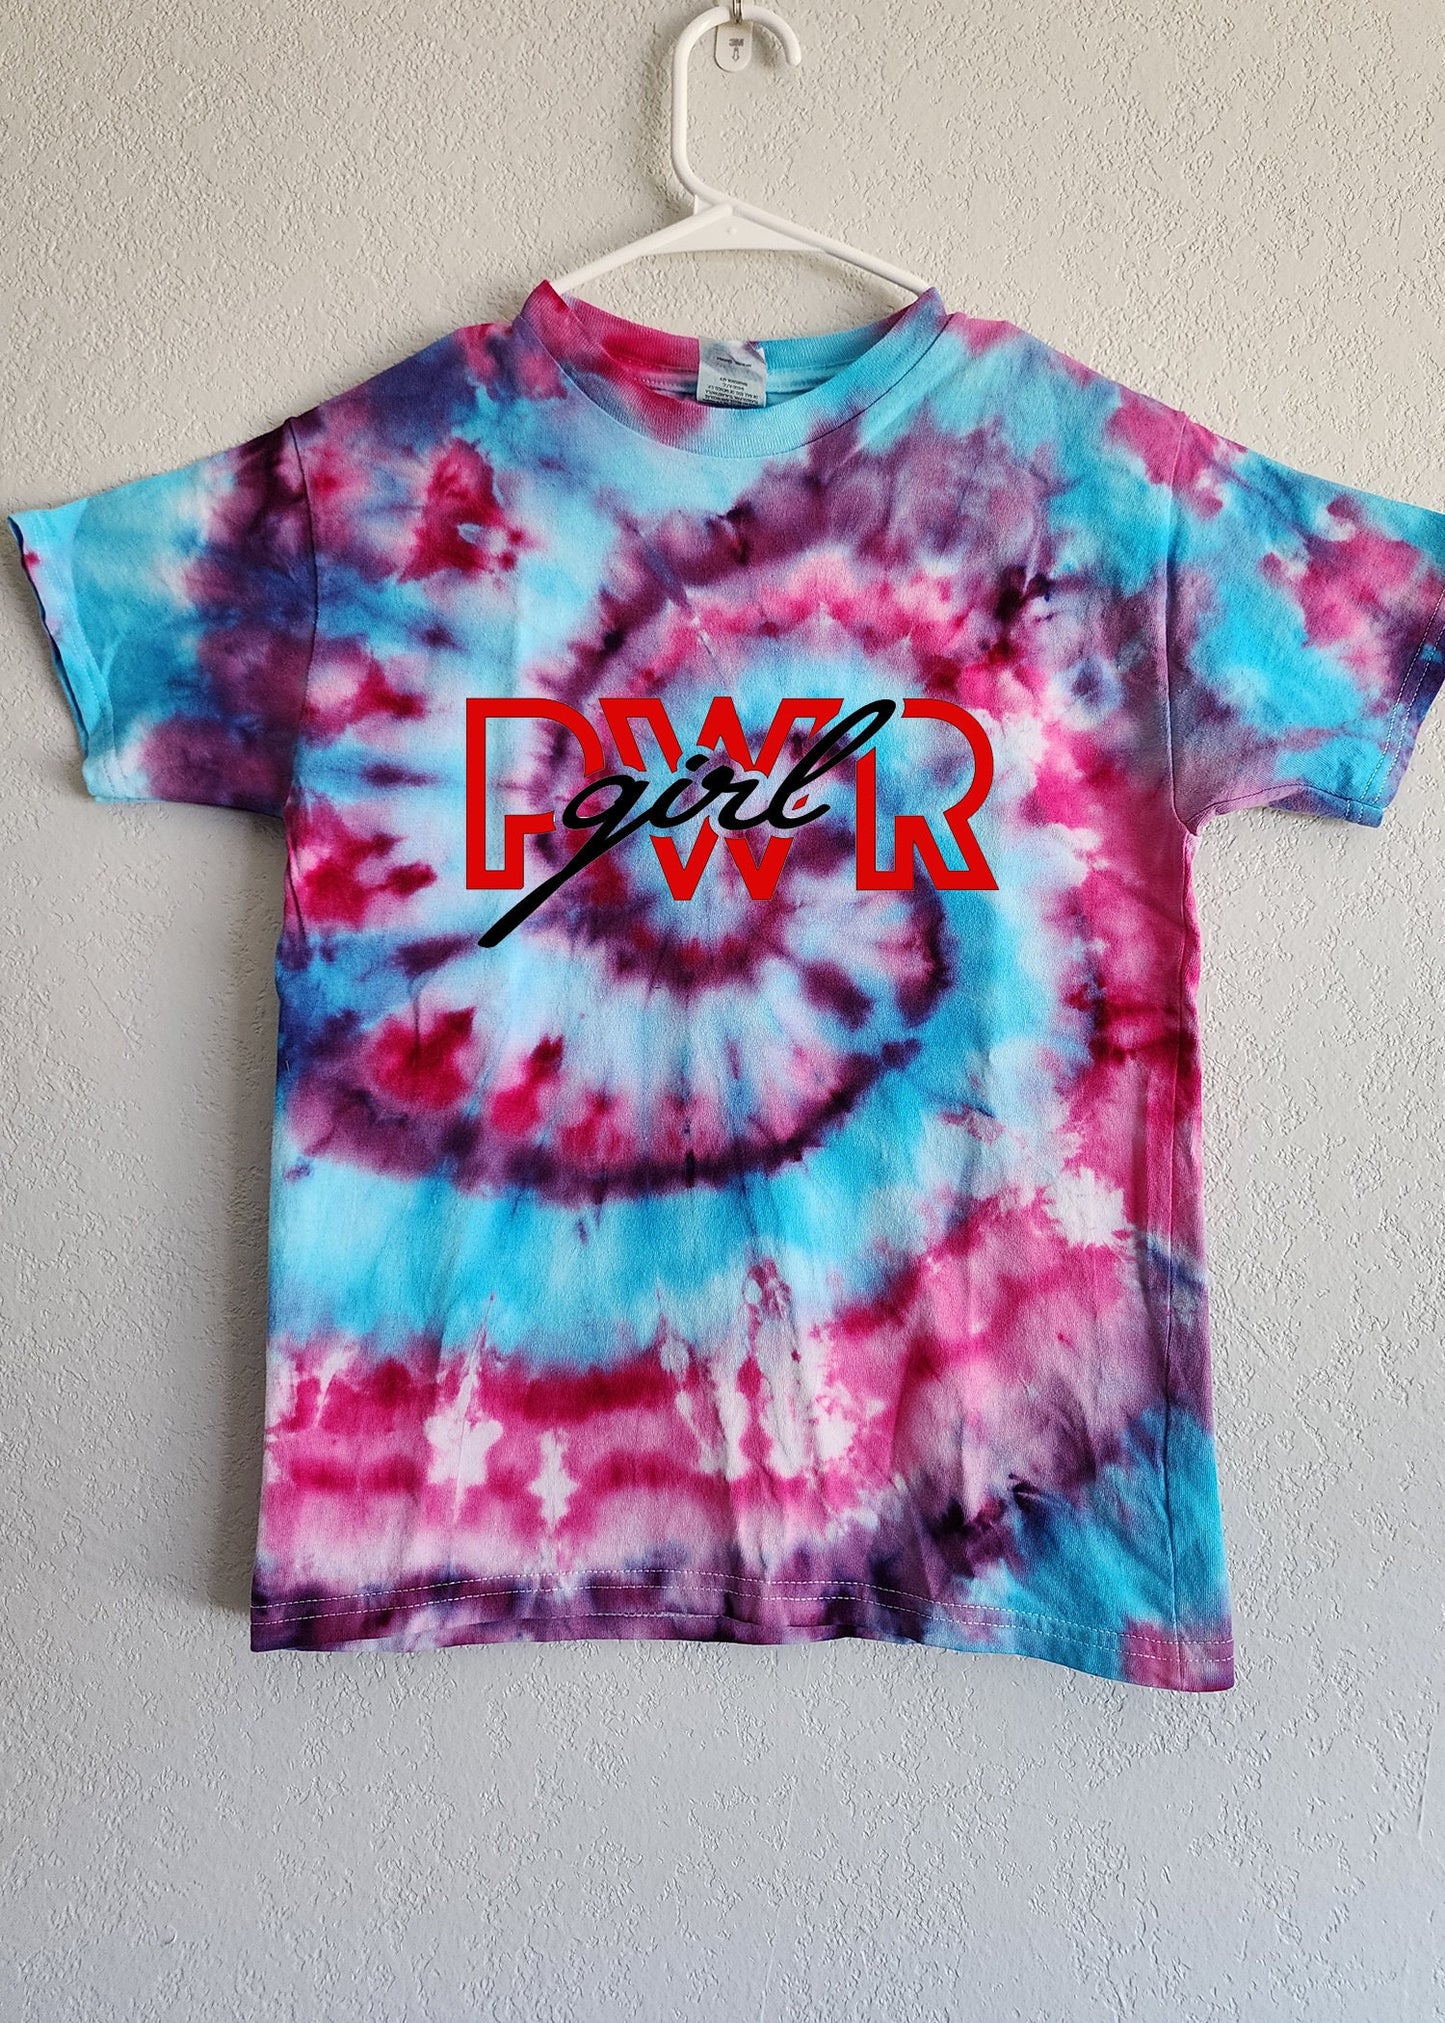 Kid's Pink & Blue Spiral Tie Dye T Shirt Customizable Size Youth M